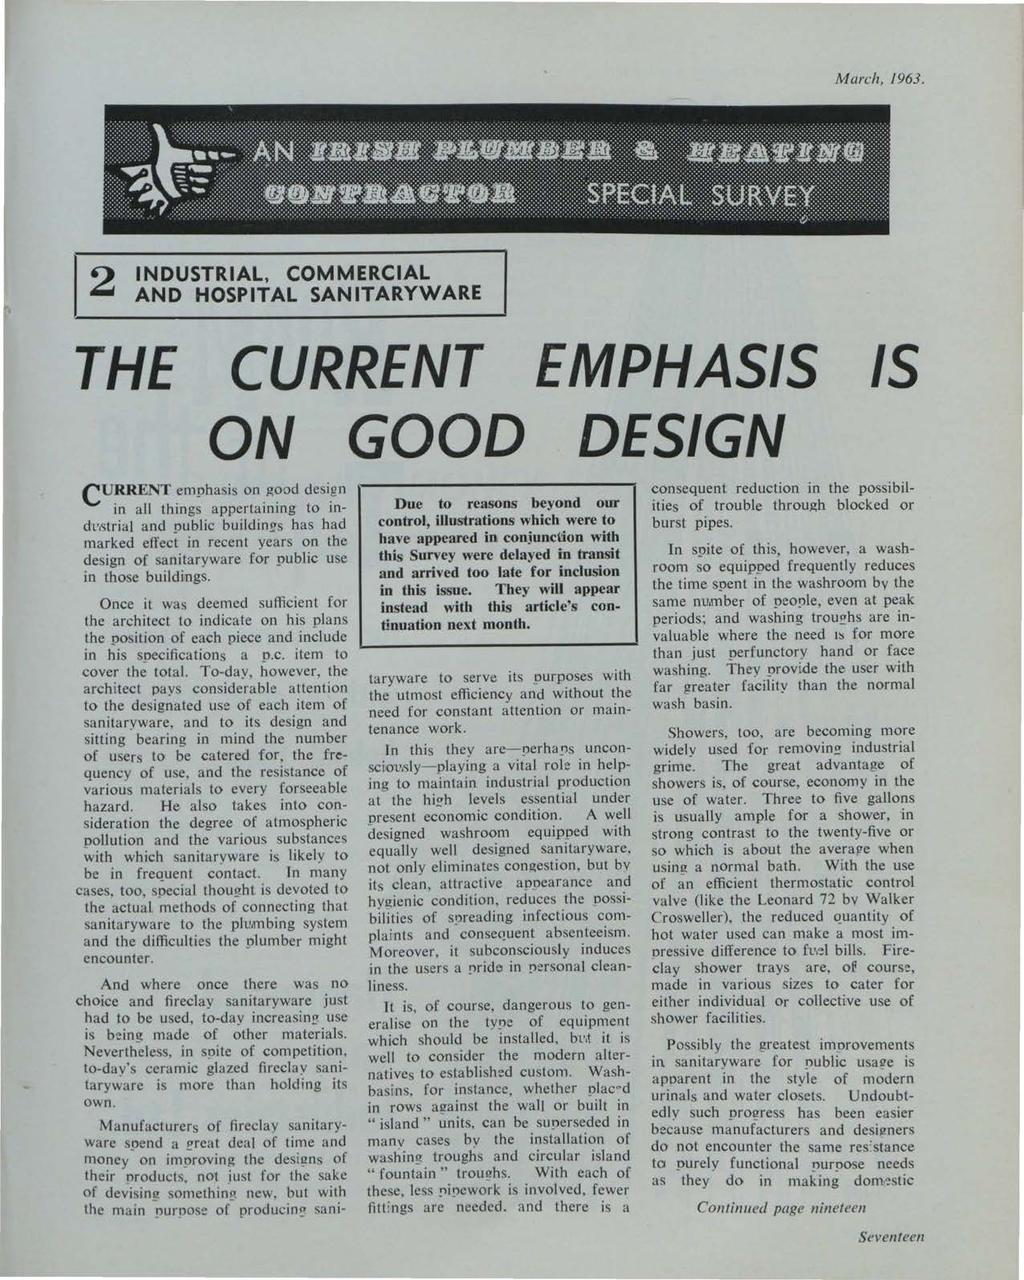 et al.: The Irish Plumber and Heating Contractor, March 1963 (complete is March, 1963.